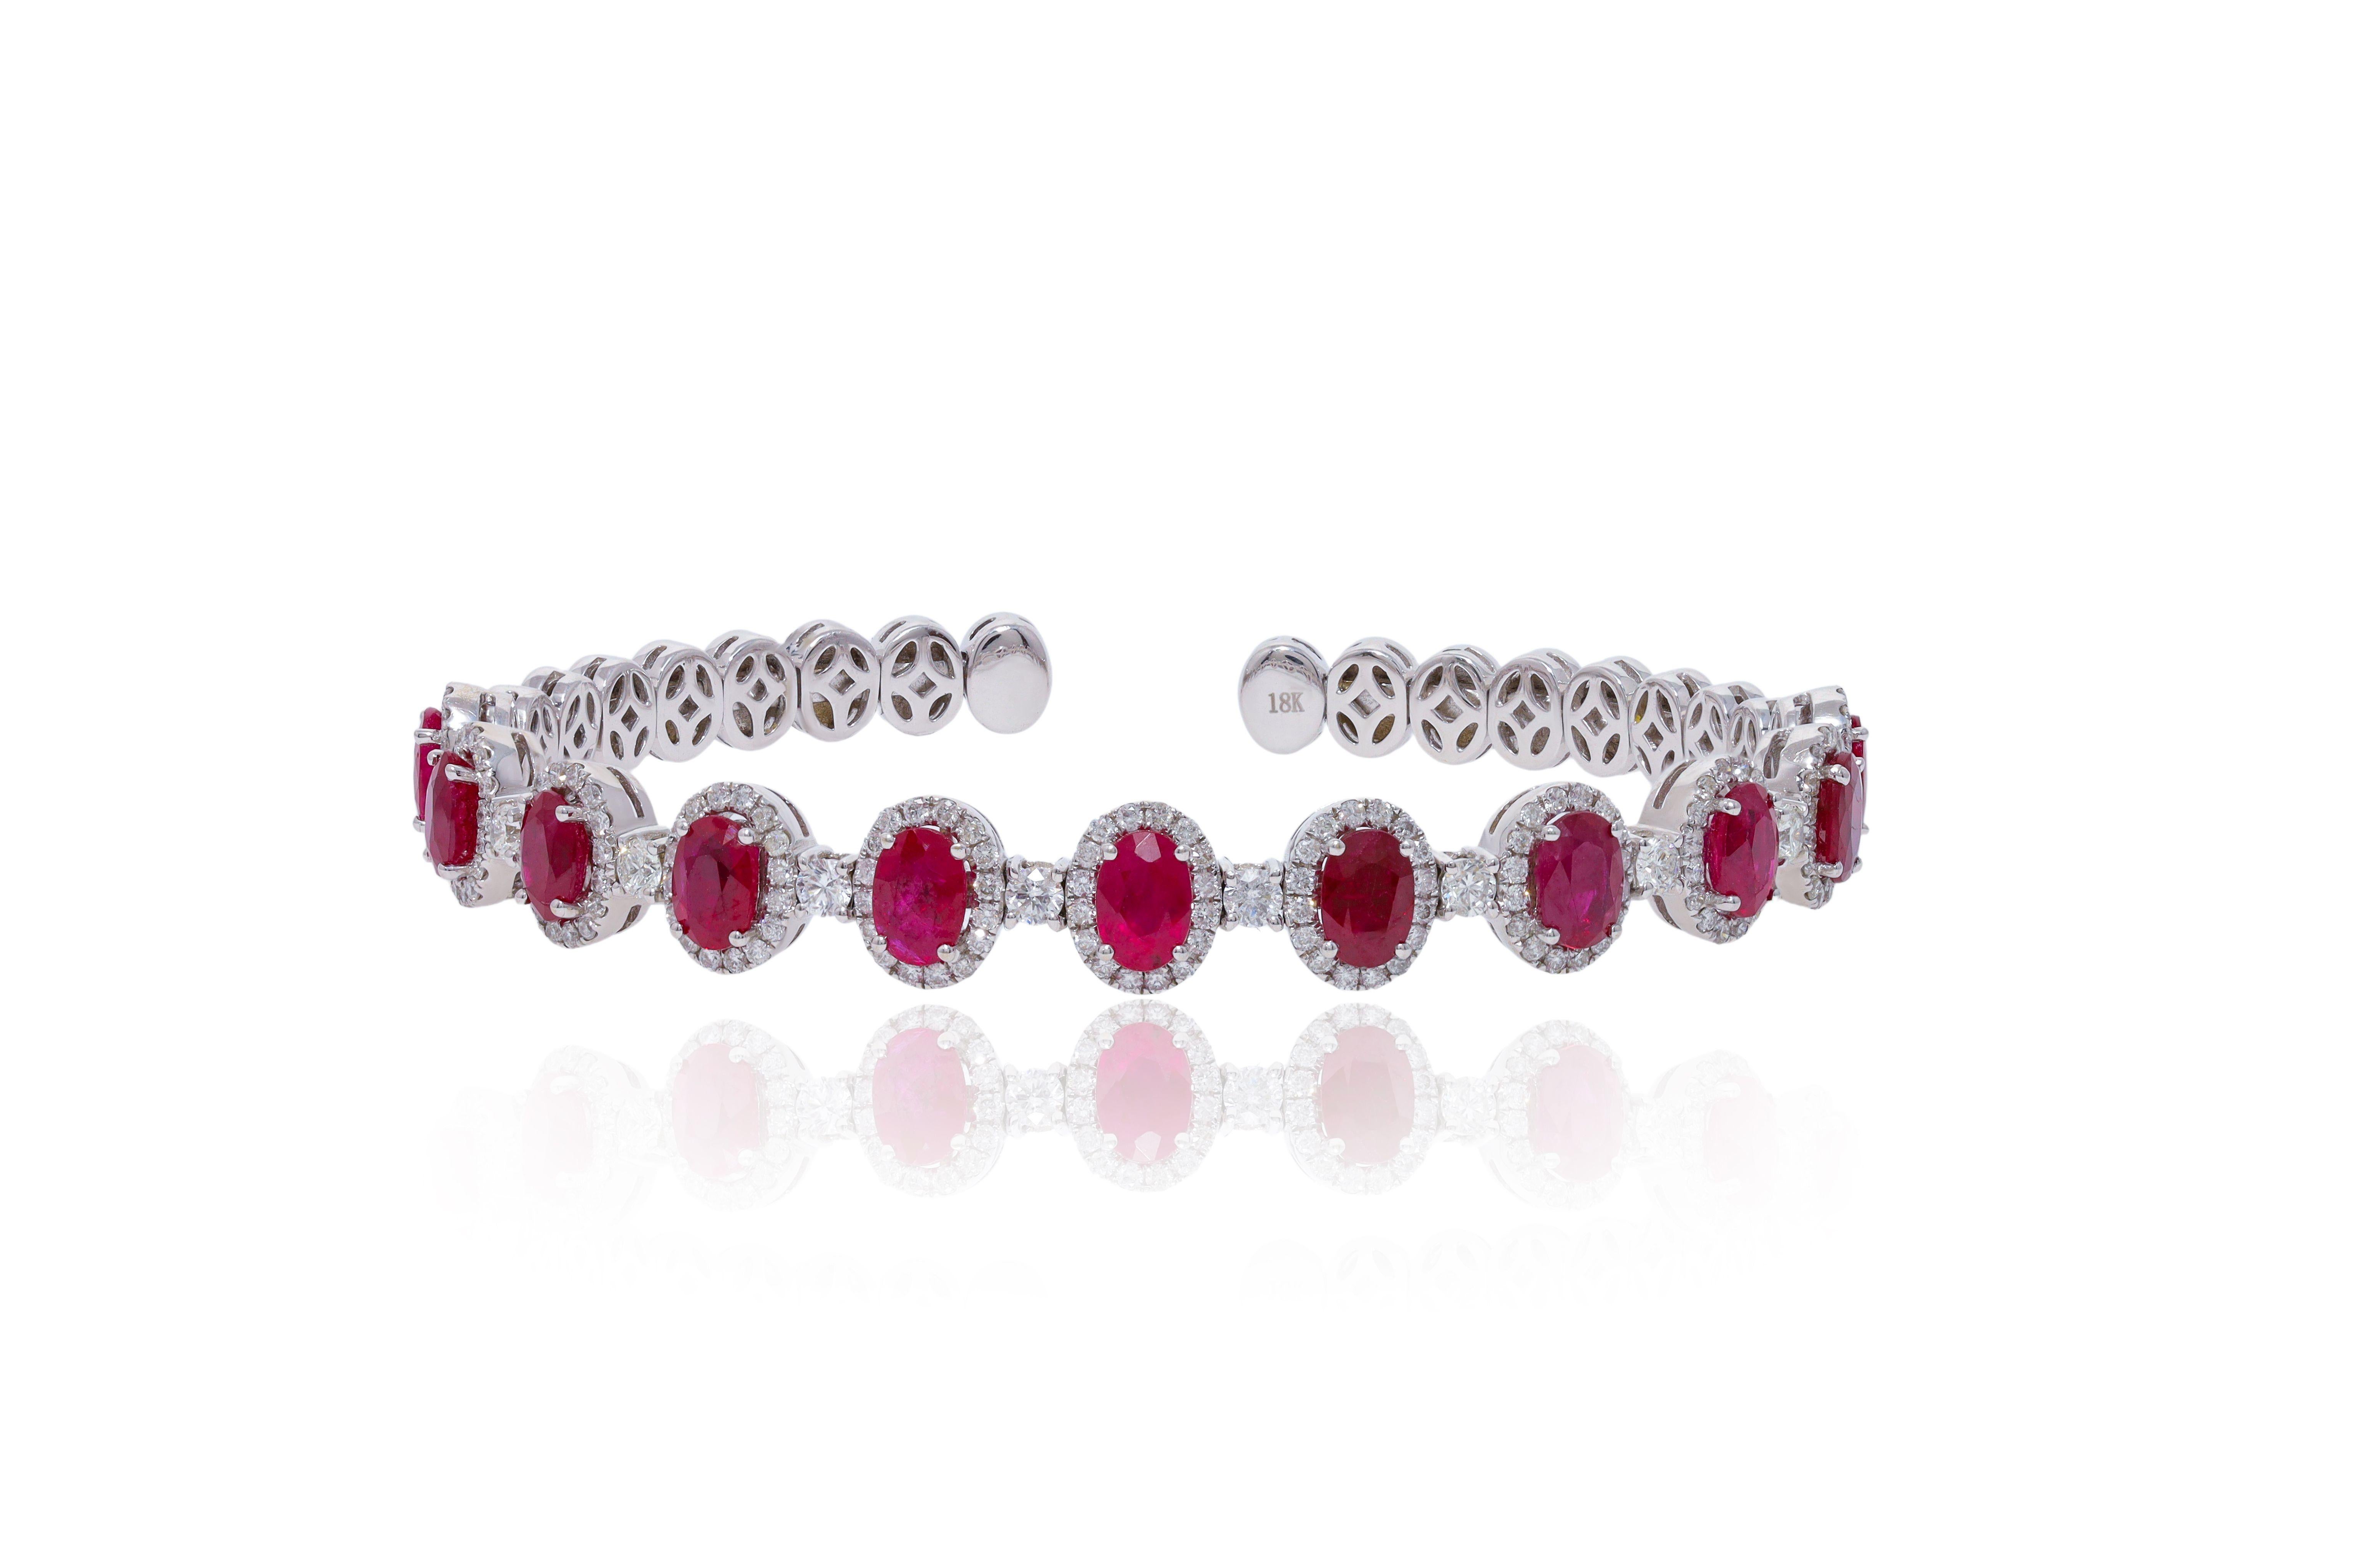 Diana M. 6.46 Carat Ruby Diamond Bracelet in White Gold In New Condition For Sale In New York, NY